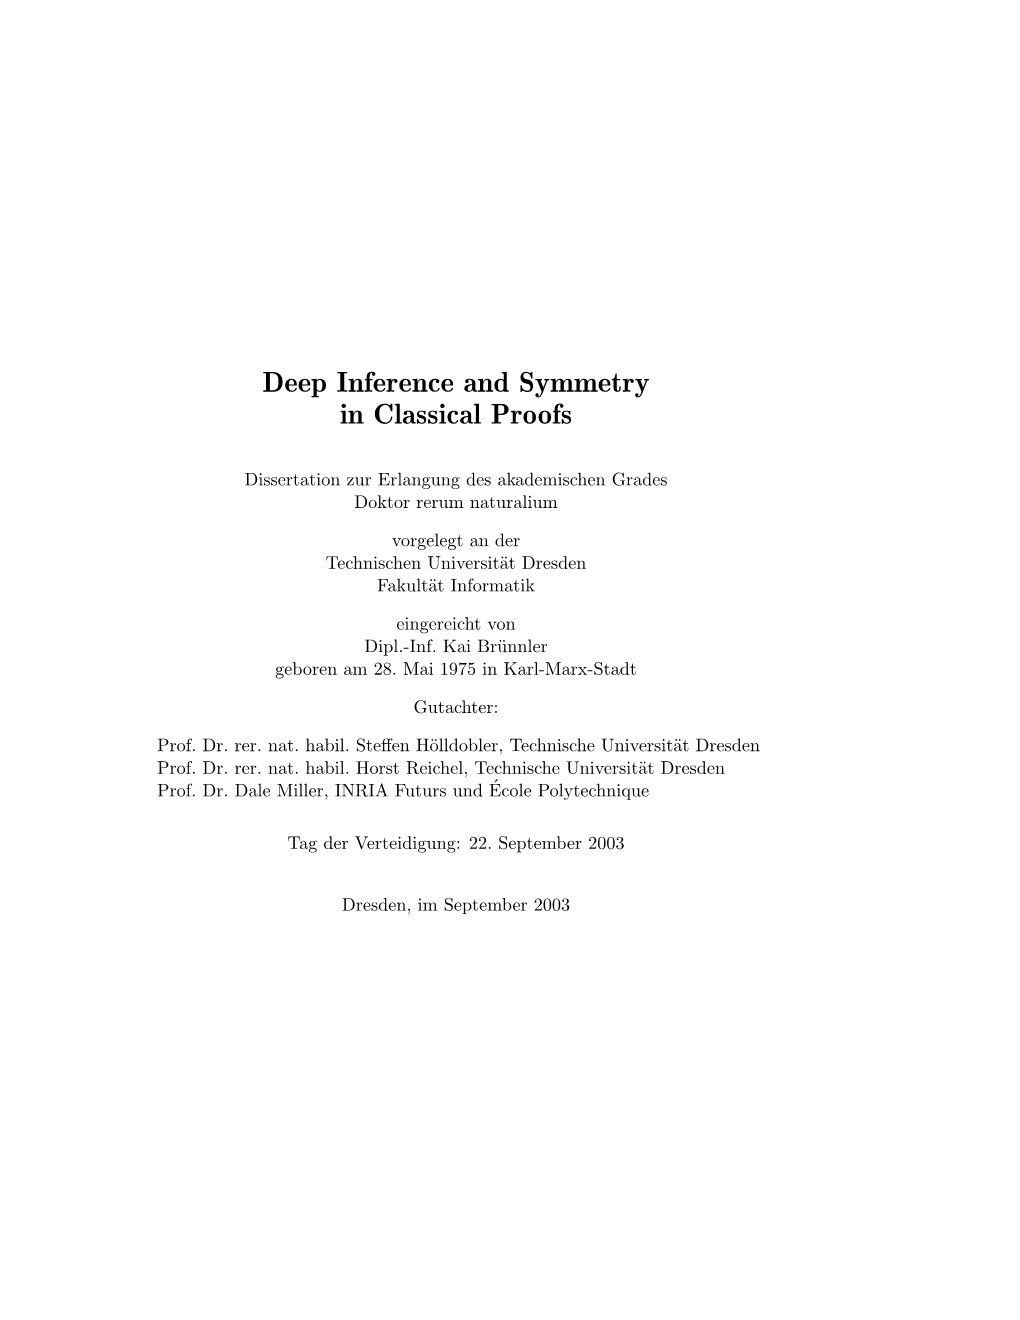 Deep Inference and Symmetry in Classical Proofs